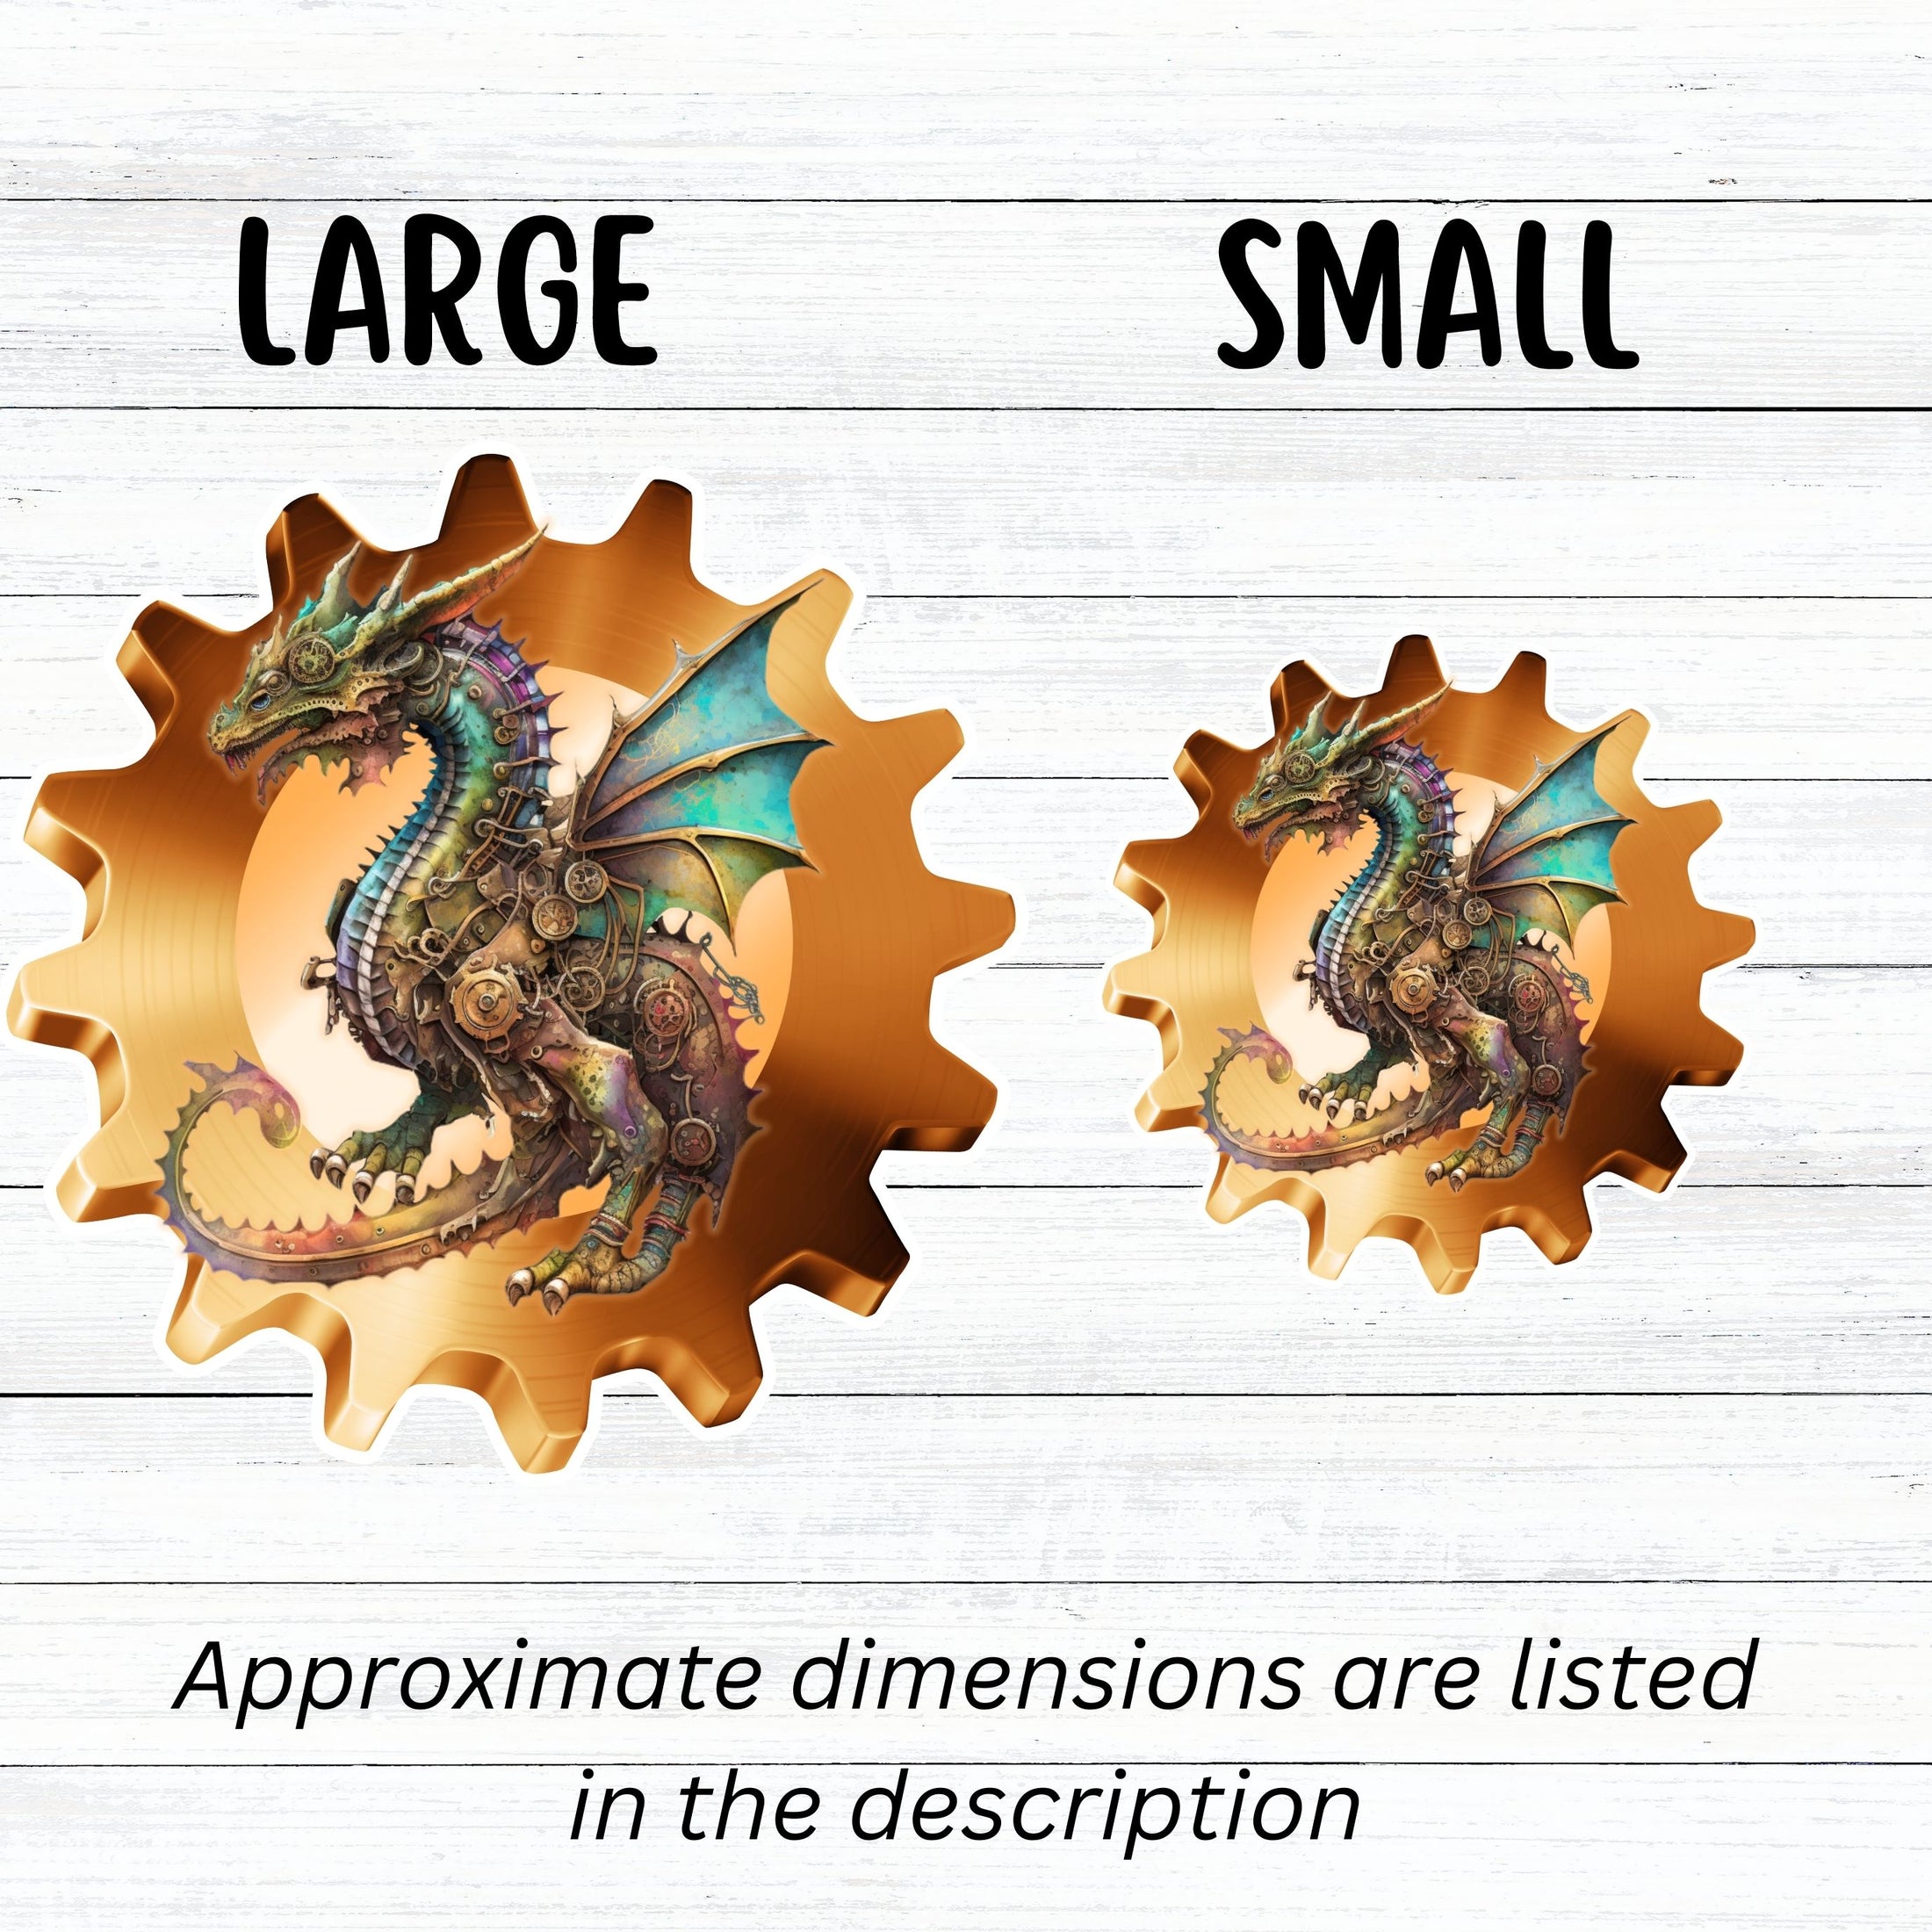 This image shows large and small steampunk dragon on a gear stickers next to each other.